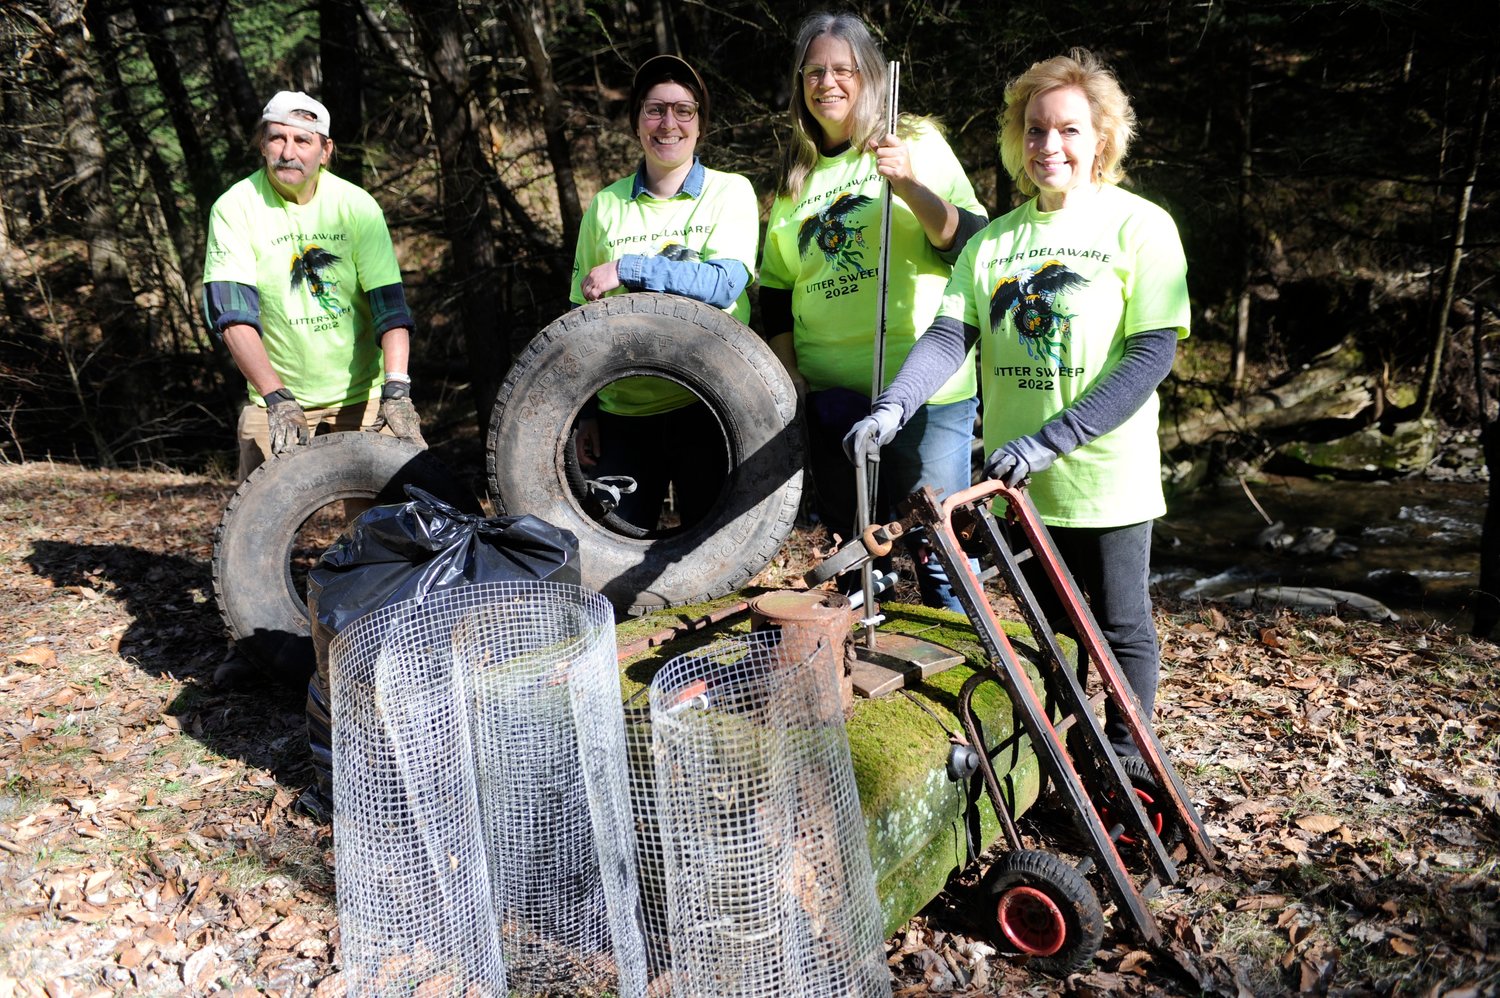 A fine haul. Volunteers clean up an old illegal dumpsite: Dan Bowers, left; Ashley Hall-Bagdonas; Kate Sykes Bowers and Laurie Ramie.